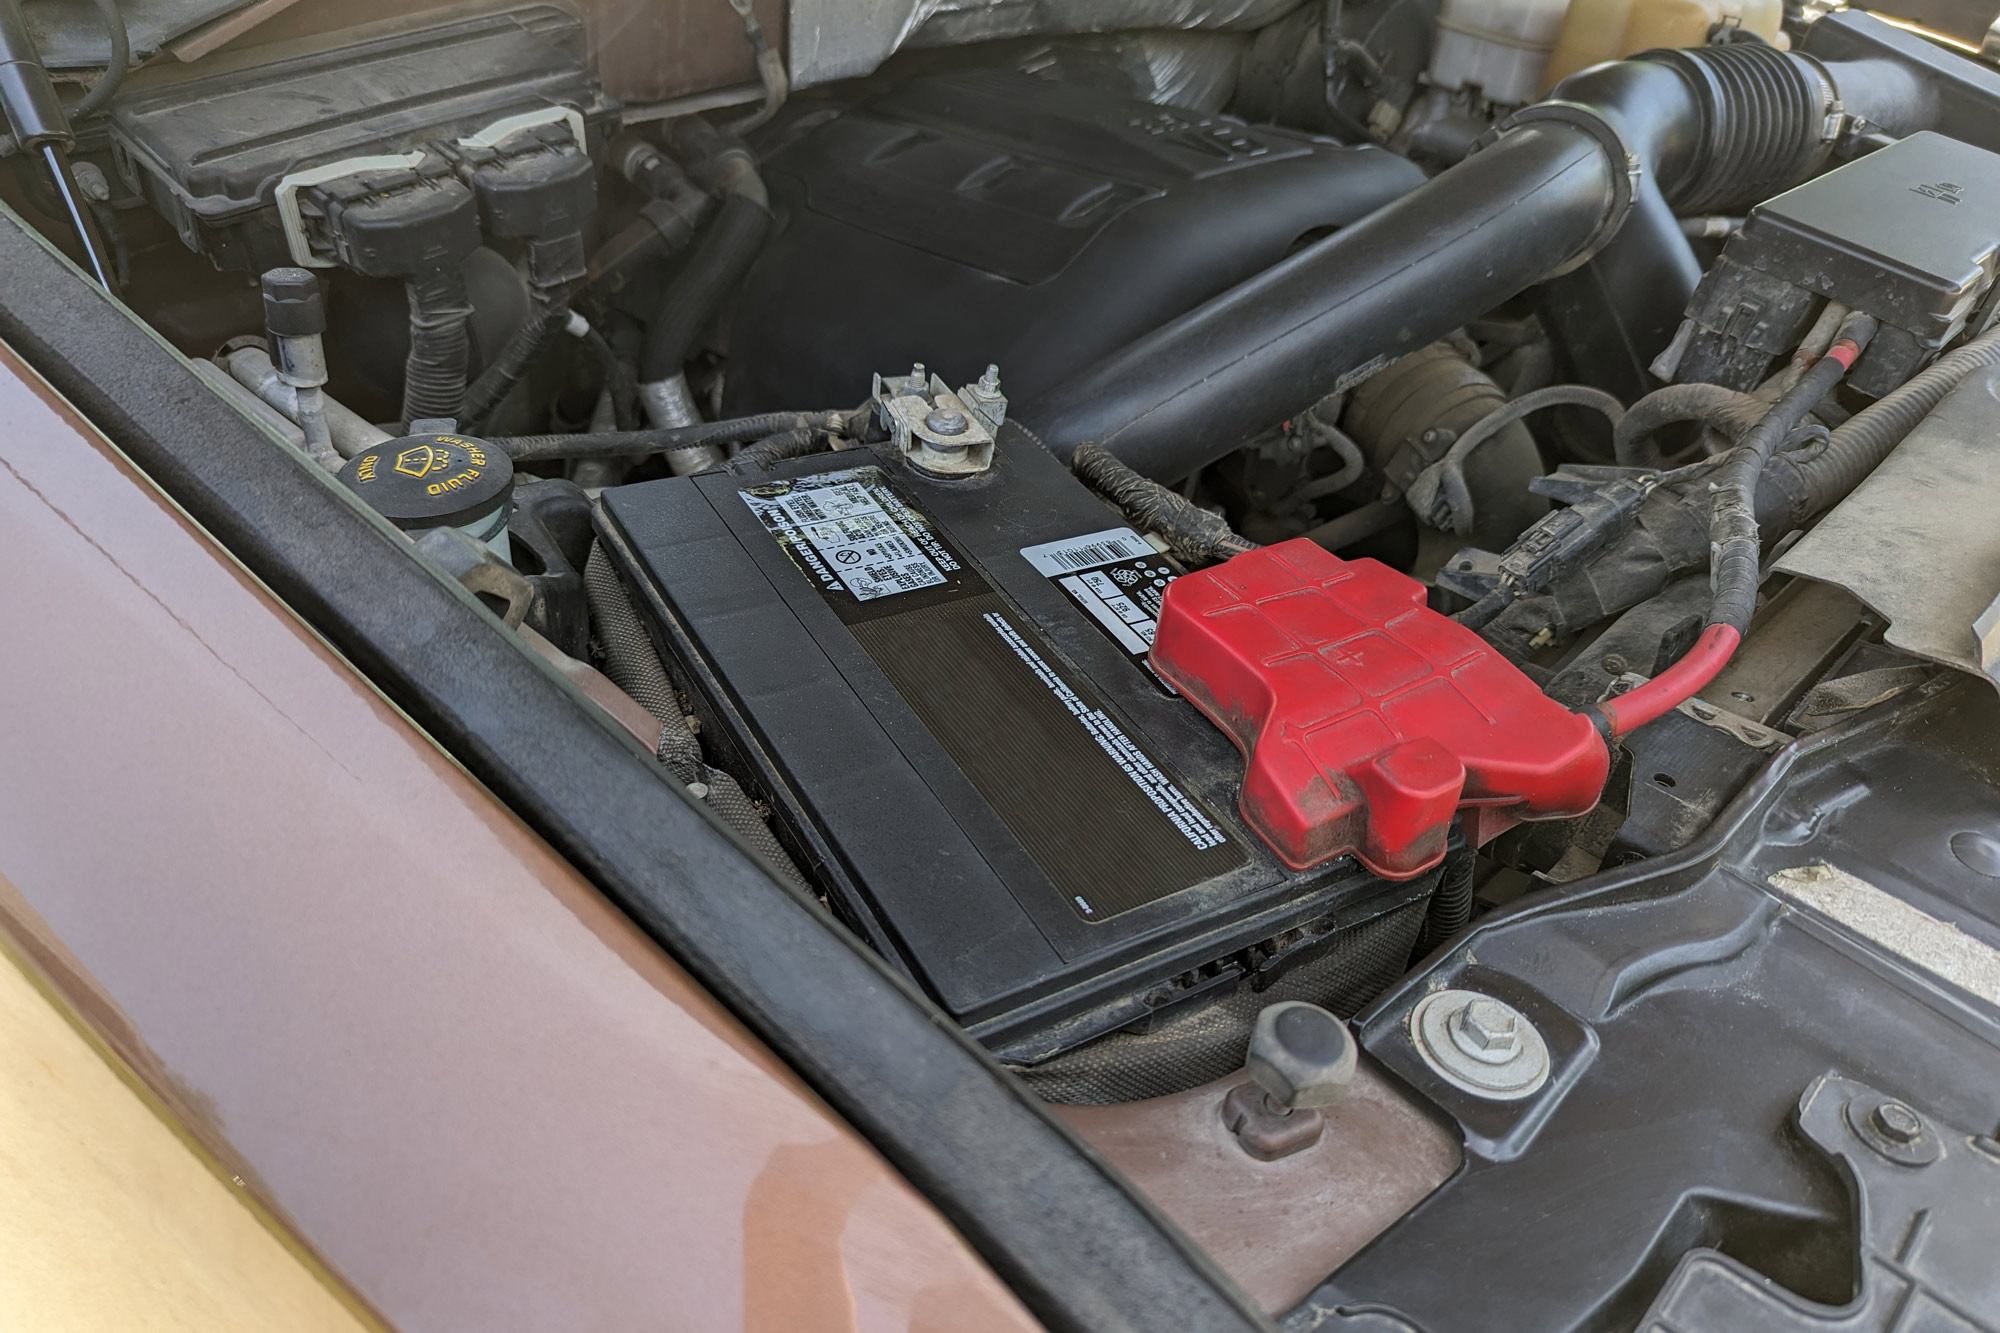 Close-up view of a 12-volt car battery in an engine bay of a brown pickup truck.